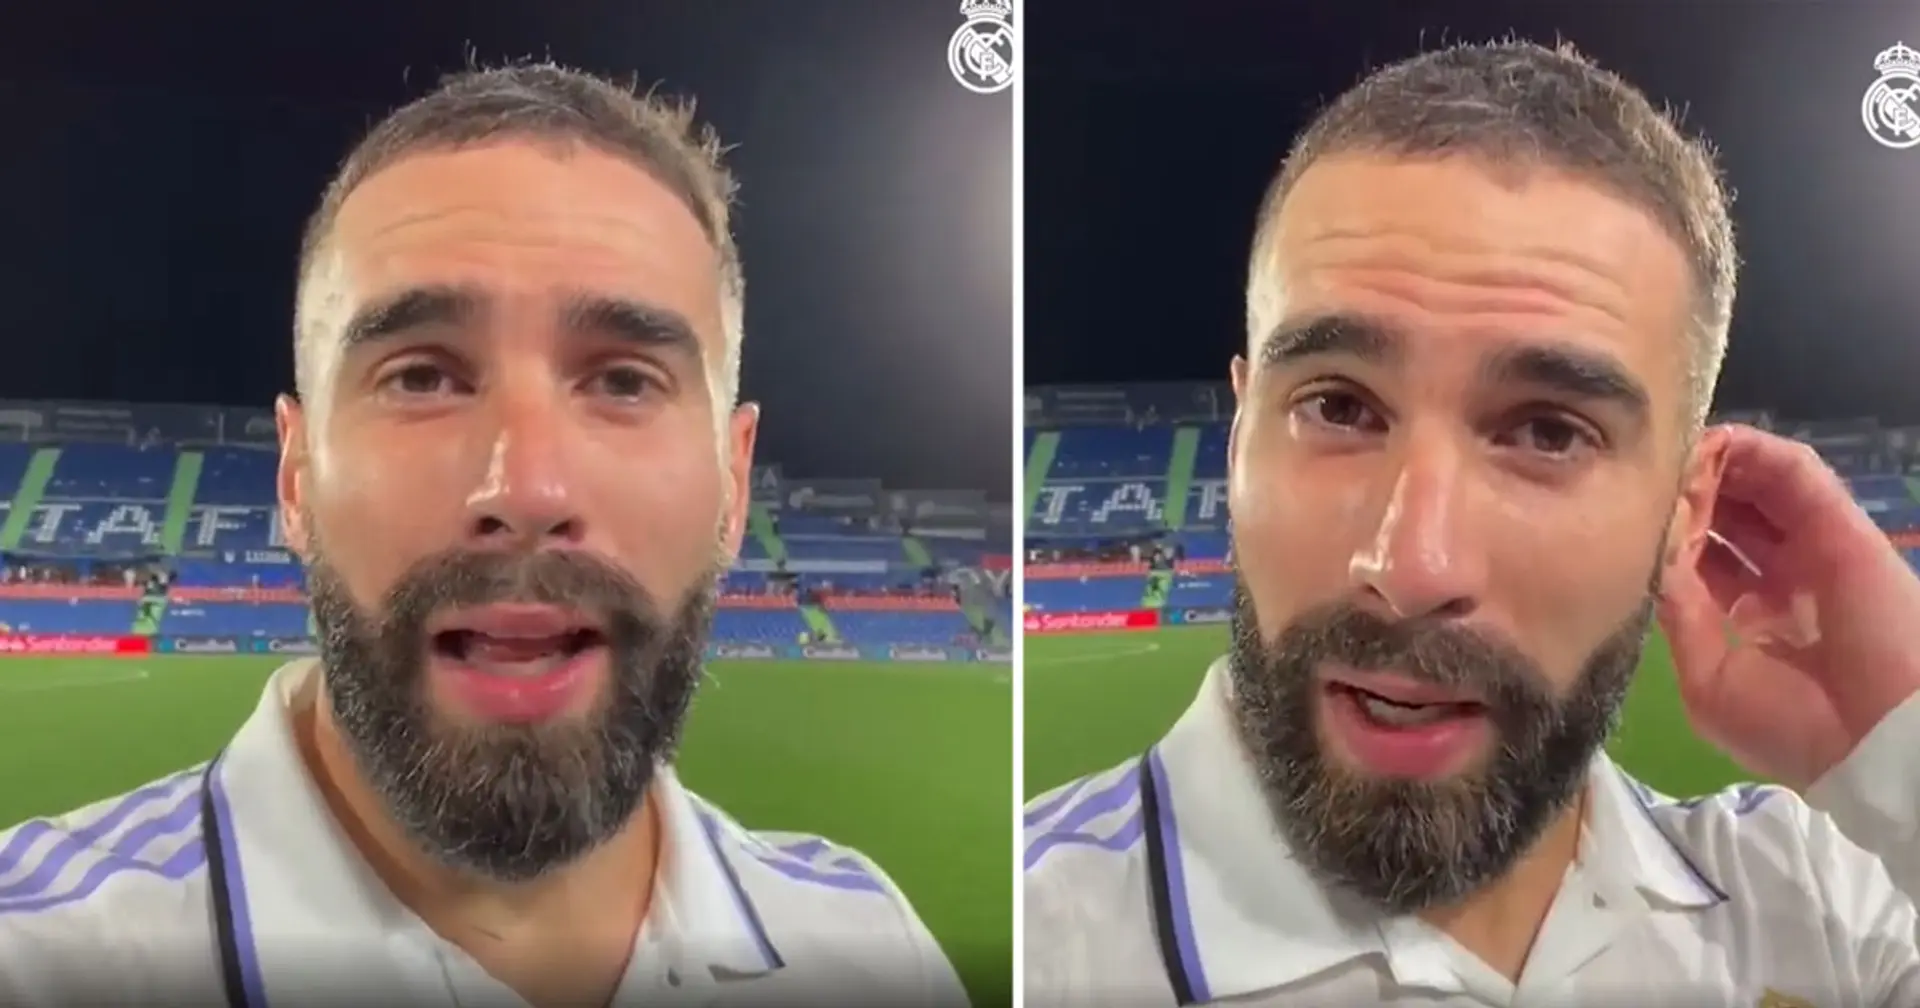 'We wanted to put pressure on Barca': Carvajal sends message ahead of Clasico